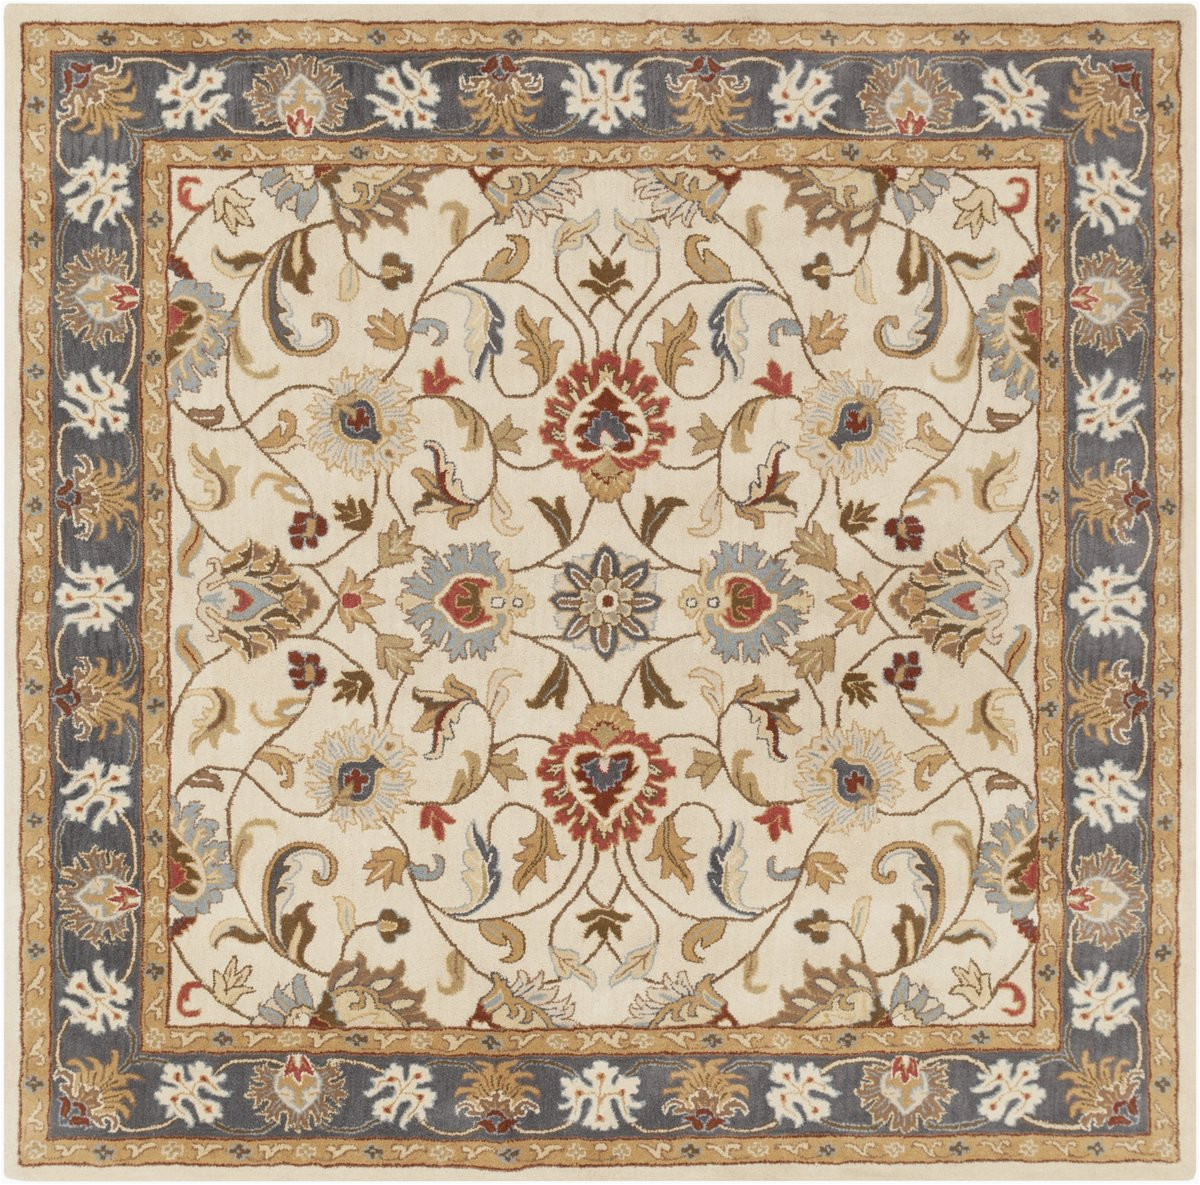 Hand Tufted Nia Traditional Wool area Rug Surya Caesar Cae-1125 area Rugs Wool Traditional / oriental area …